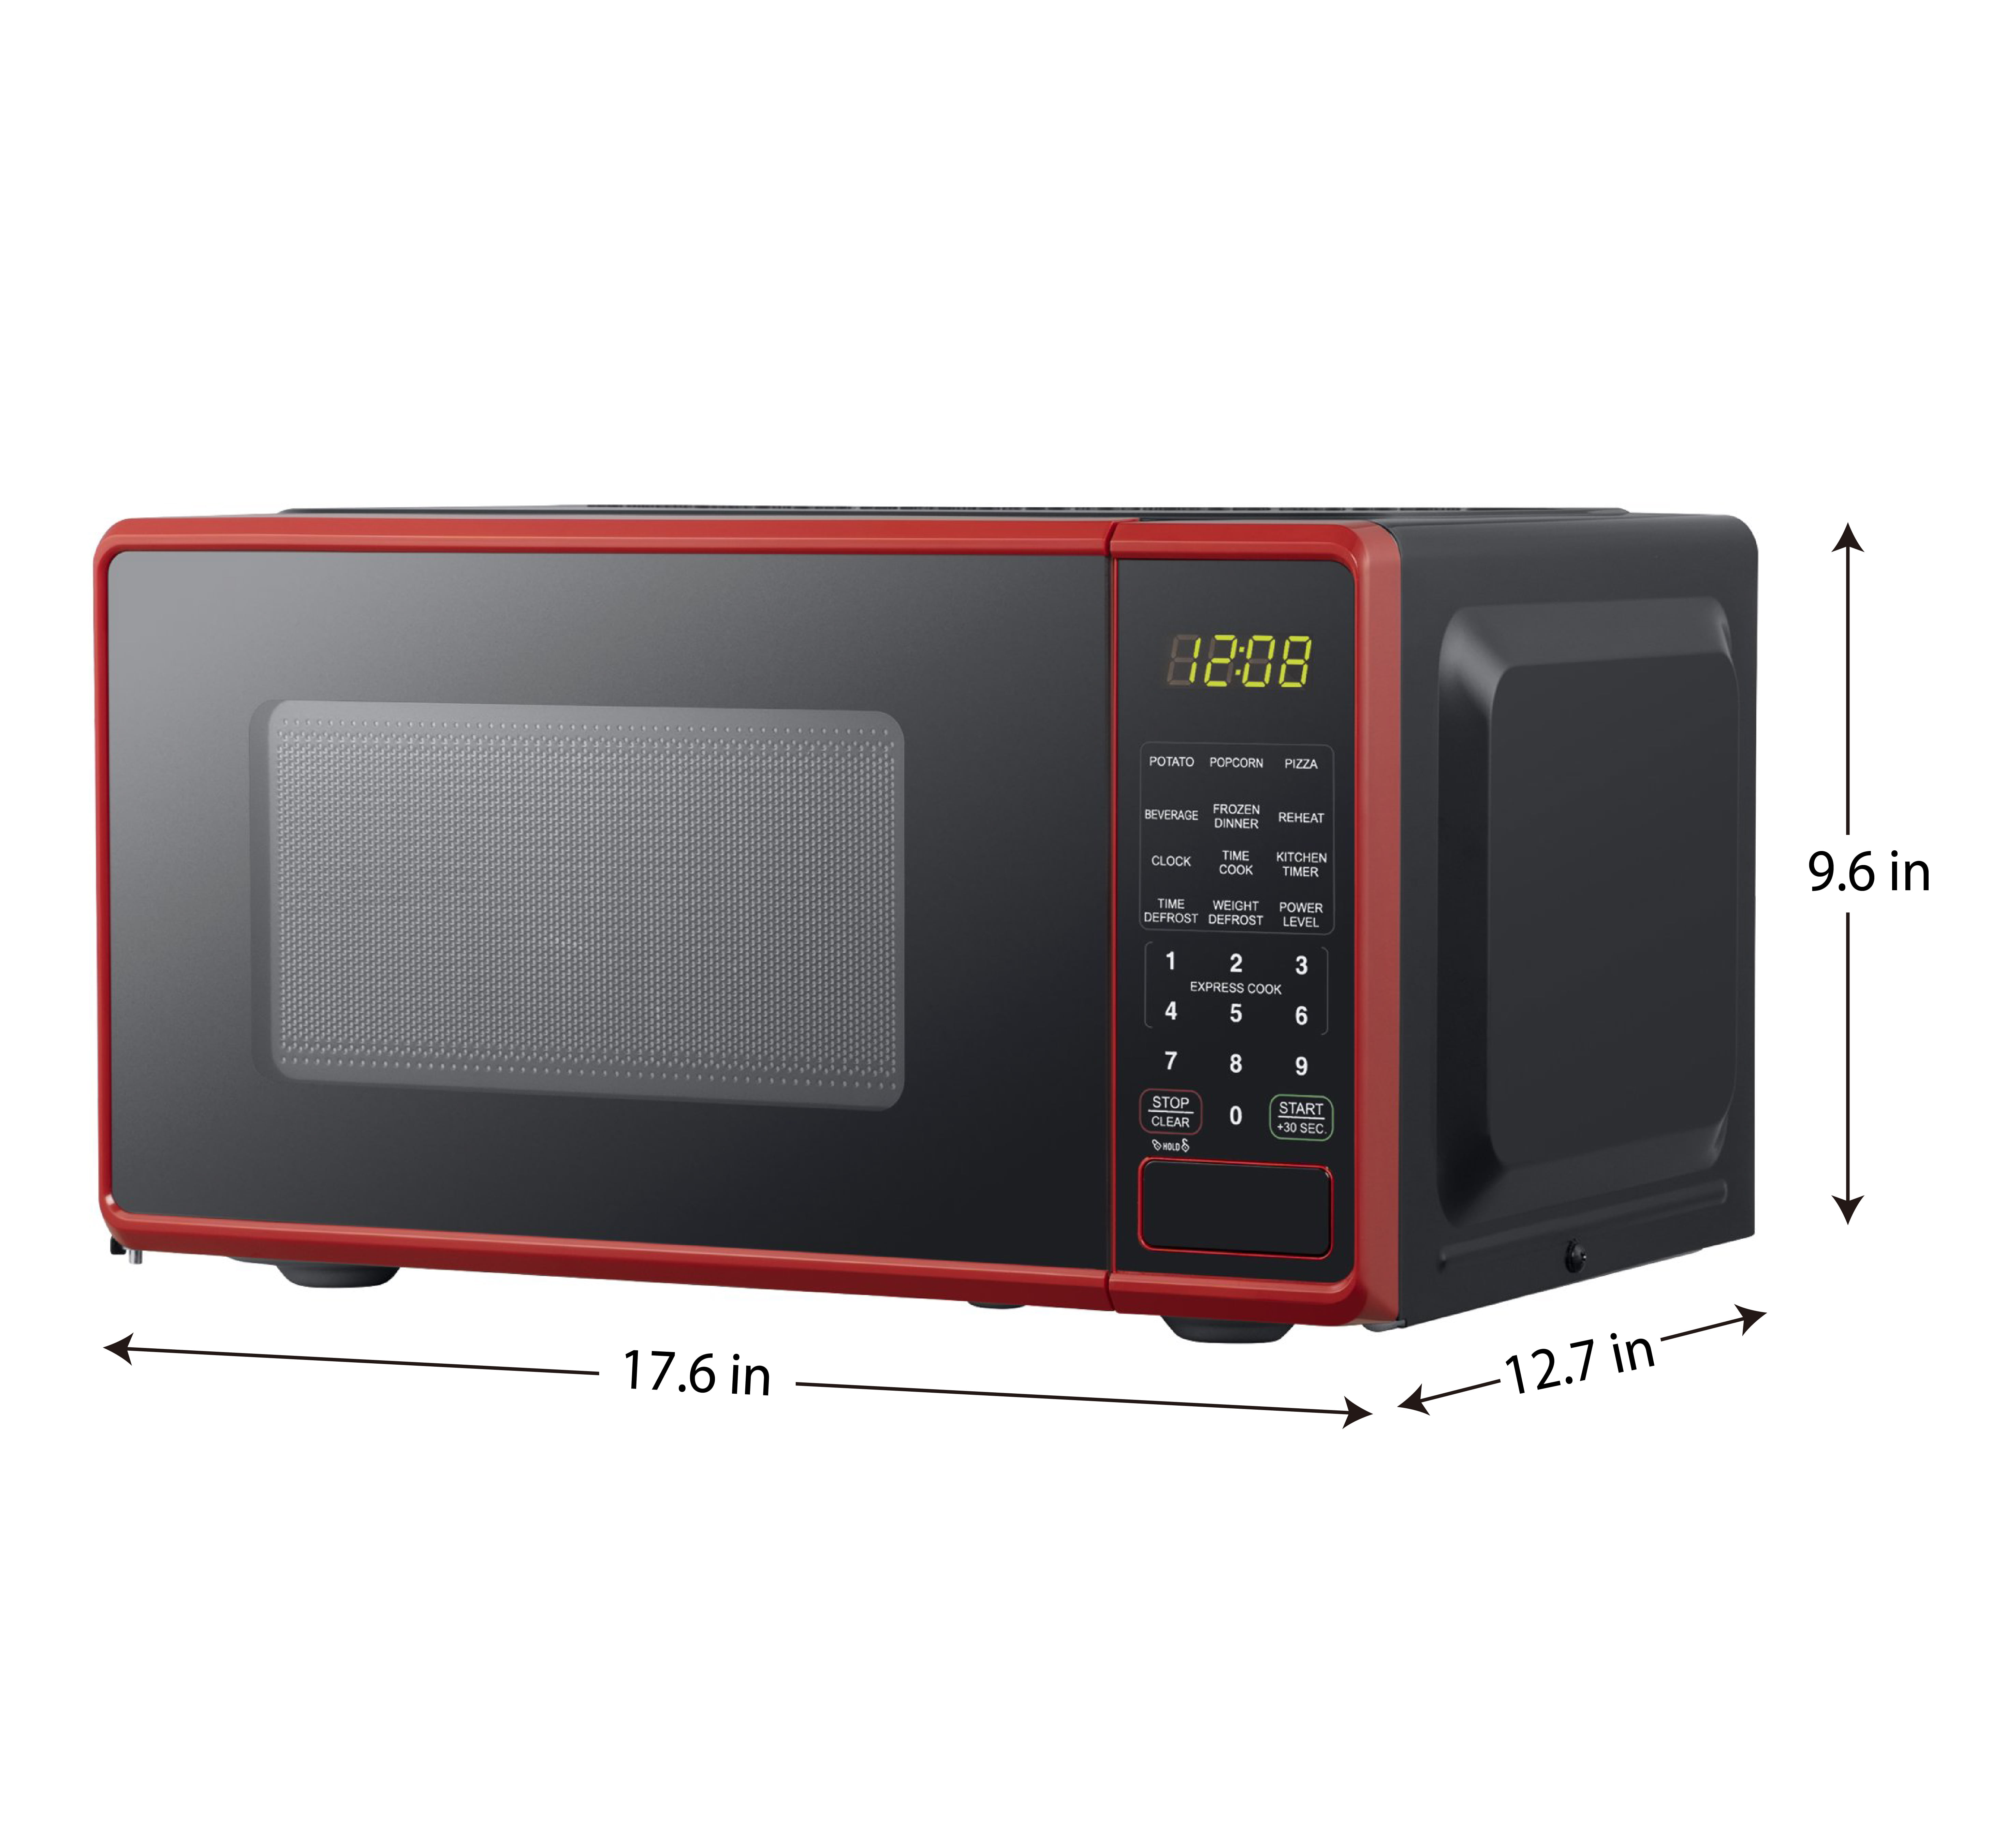 Mainstays 0.7 Cu ft Compact Countertop Microwave Oven, Red - 2